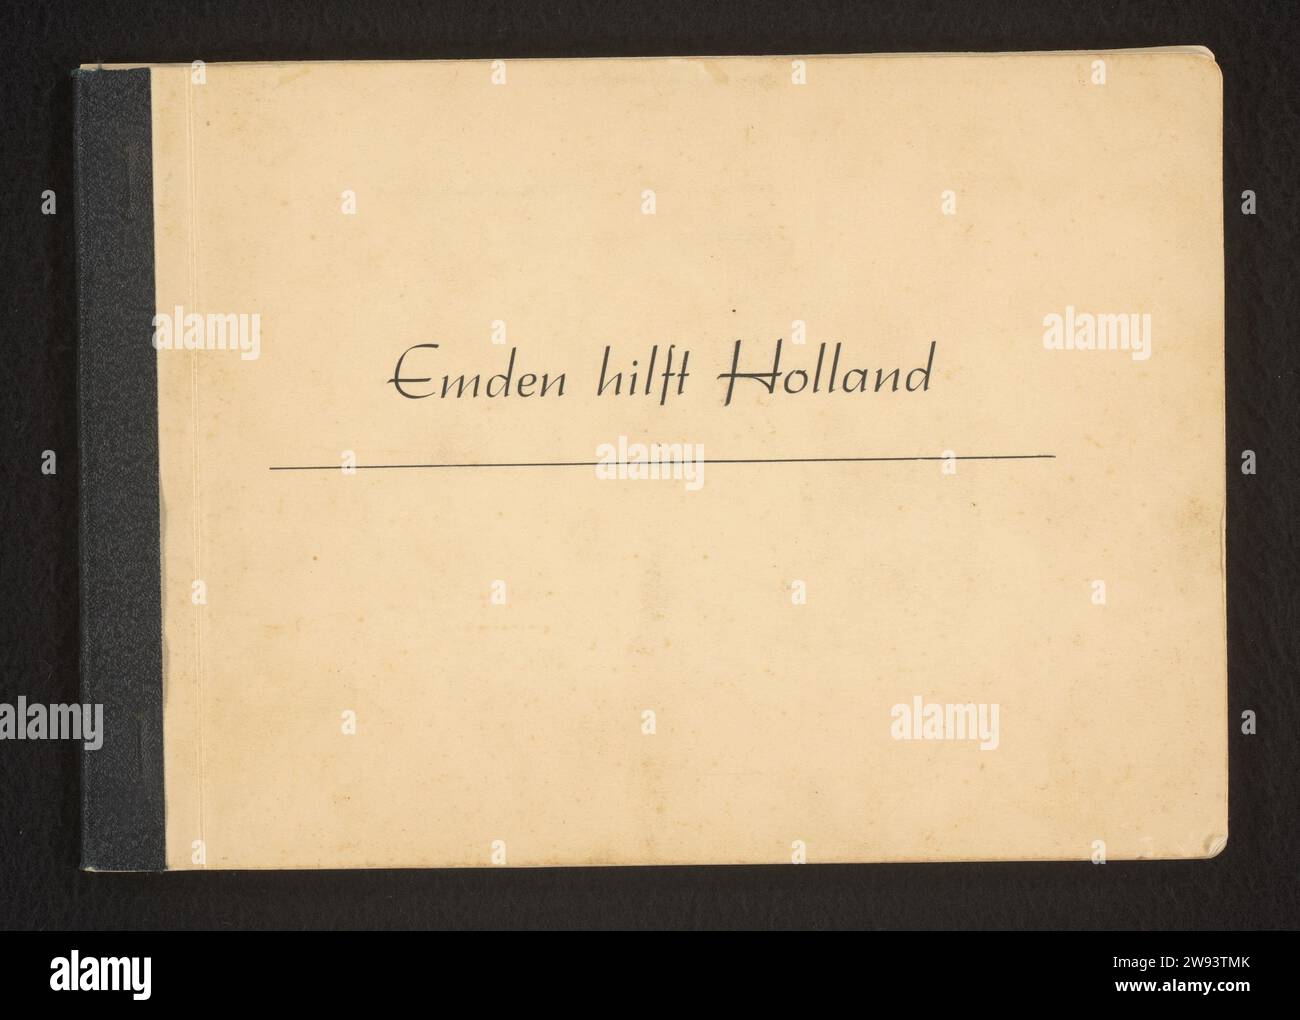 Emden helps Holland, 1953  Photo album entitled 'Emden Hilft Holland', with photos of the construction of 38 boats as an emergency aid for the Netherlands affected by the flood of 1953. The title page says' Nordsewerke Emden Gmbh Bauen 38 Hilfsboote für die Hochwasserkatastrophe in Holland. February 1953 '. The book contains a title page and 12 pages with 17 photos. The photos show the manufacture and transport of the metal sloops. Emden paper. photographic support gelatin silver print  Emden. Netherlands Stock Photo